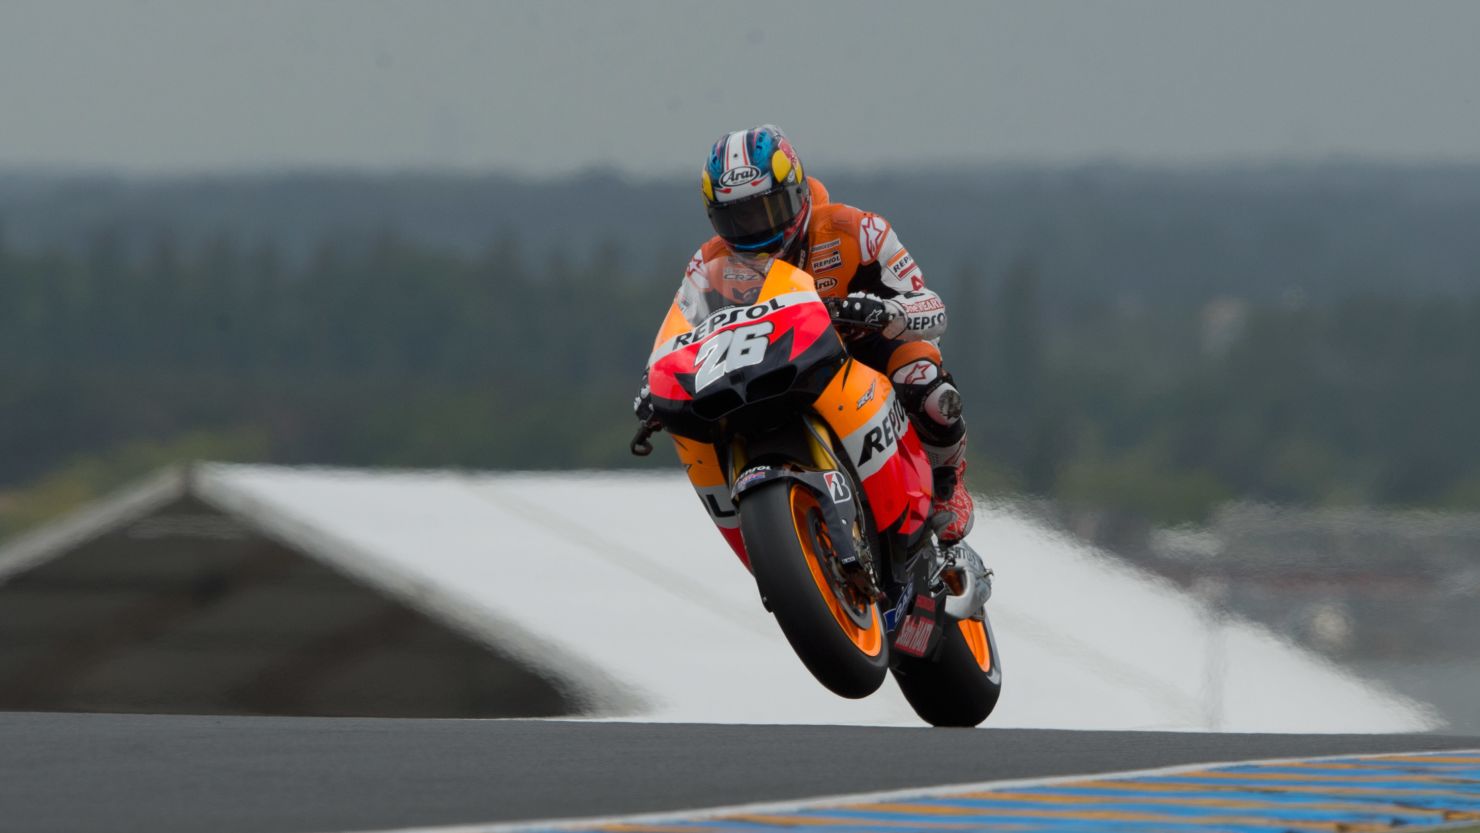 Dani Pedrosa lifts the front wheel of his Repsol Honda during Saturday's MotoGP qualifying action at Le Mans.